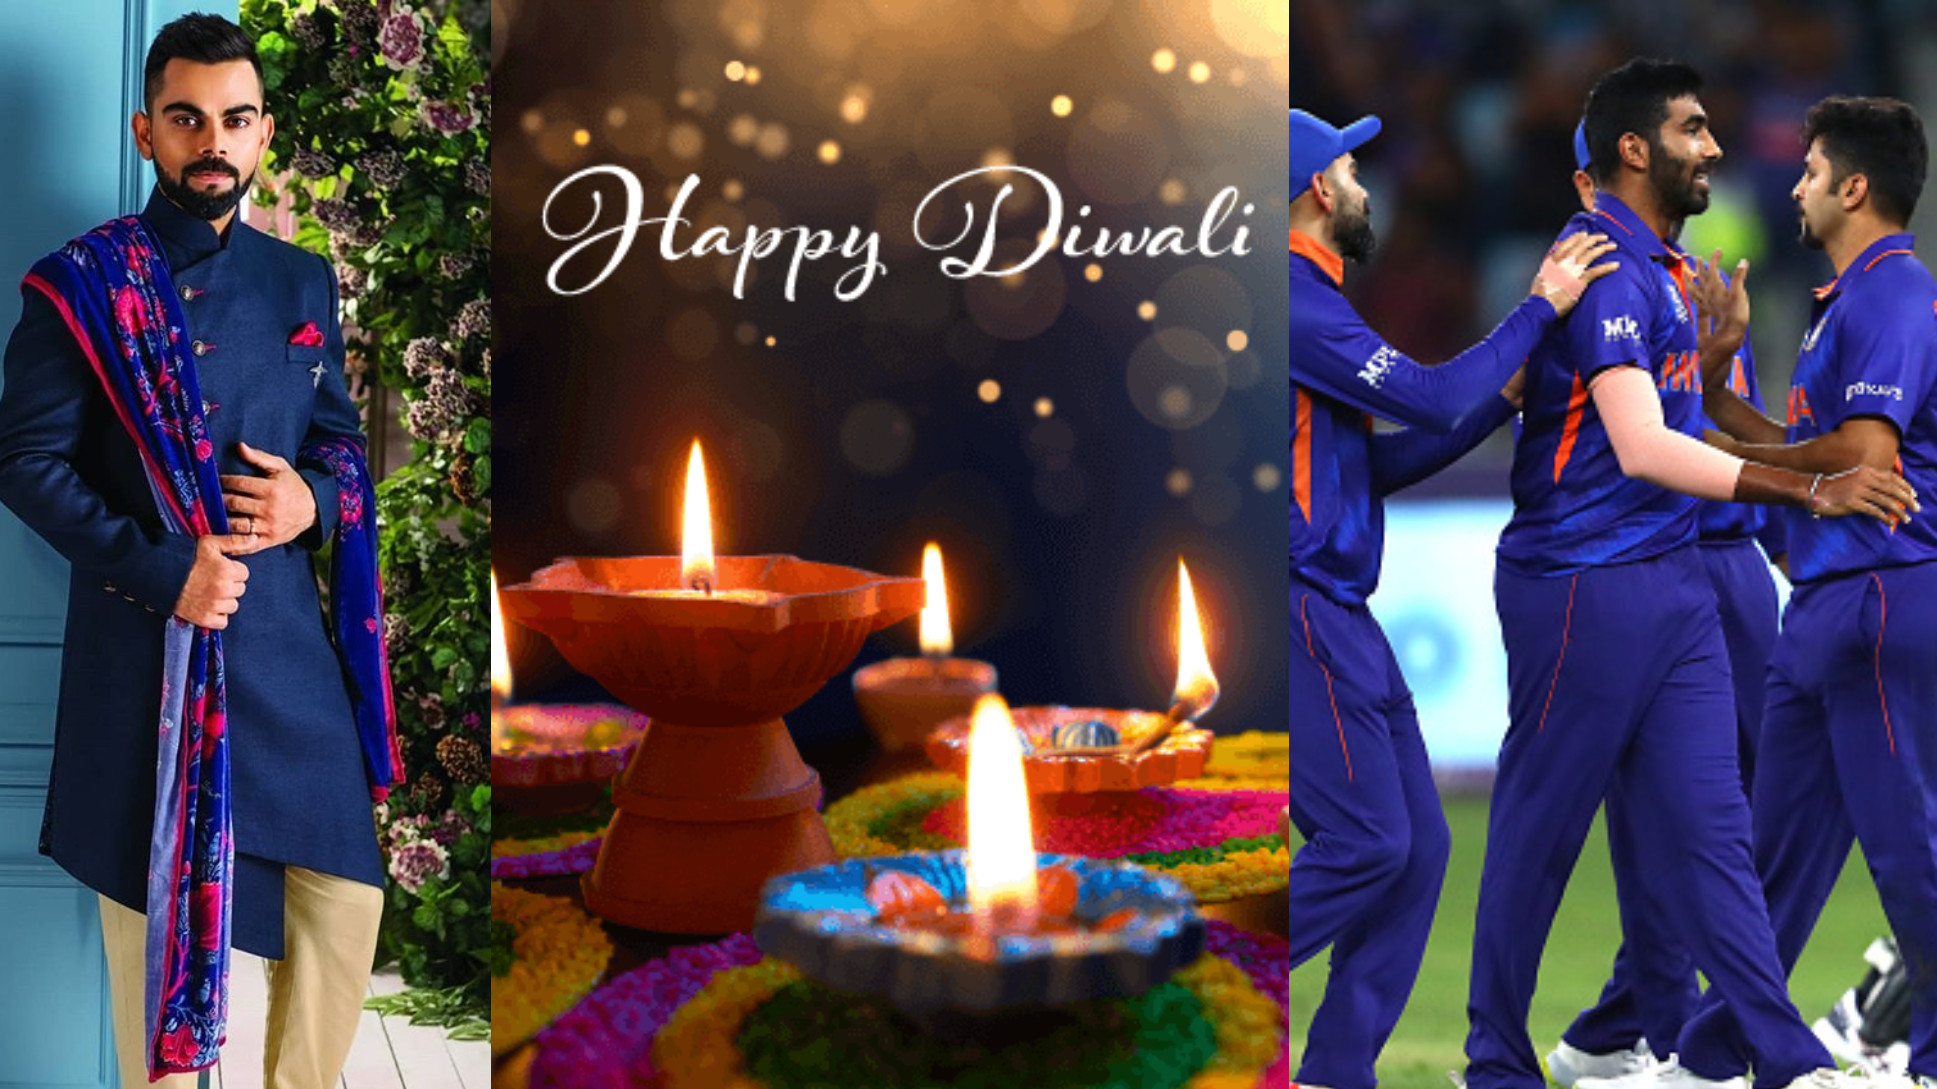 Team India wishes to fans on the holy and joyous occasion of Diwali festival